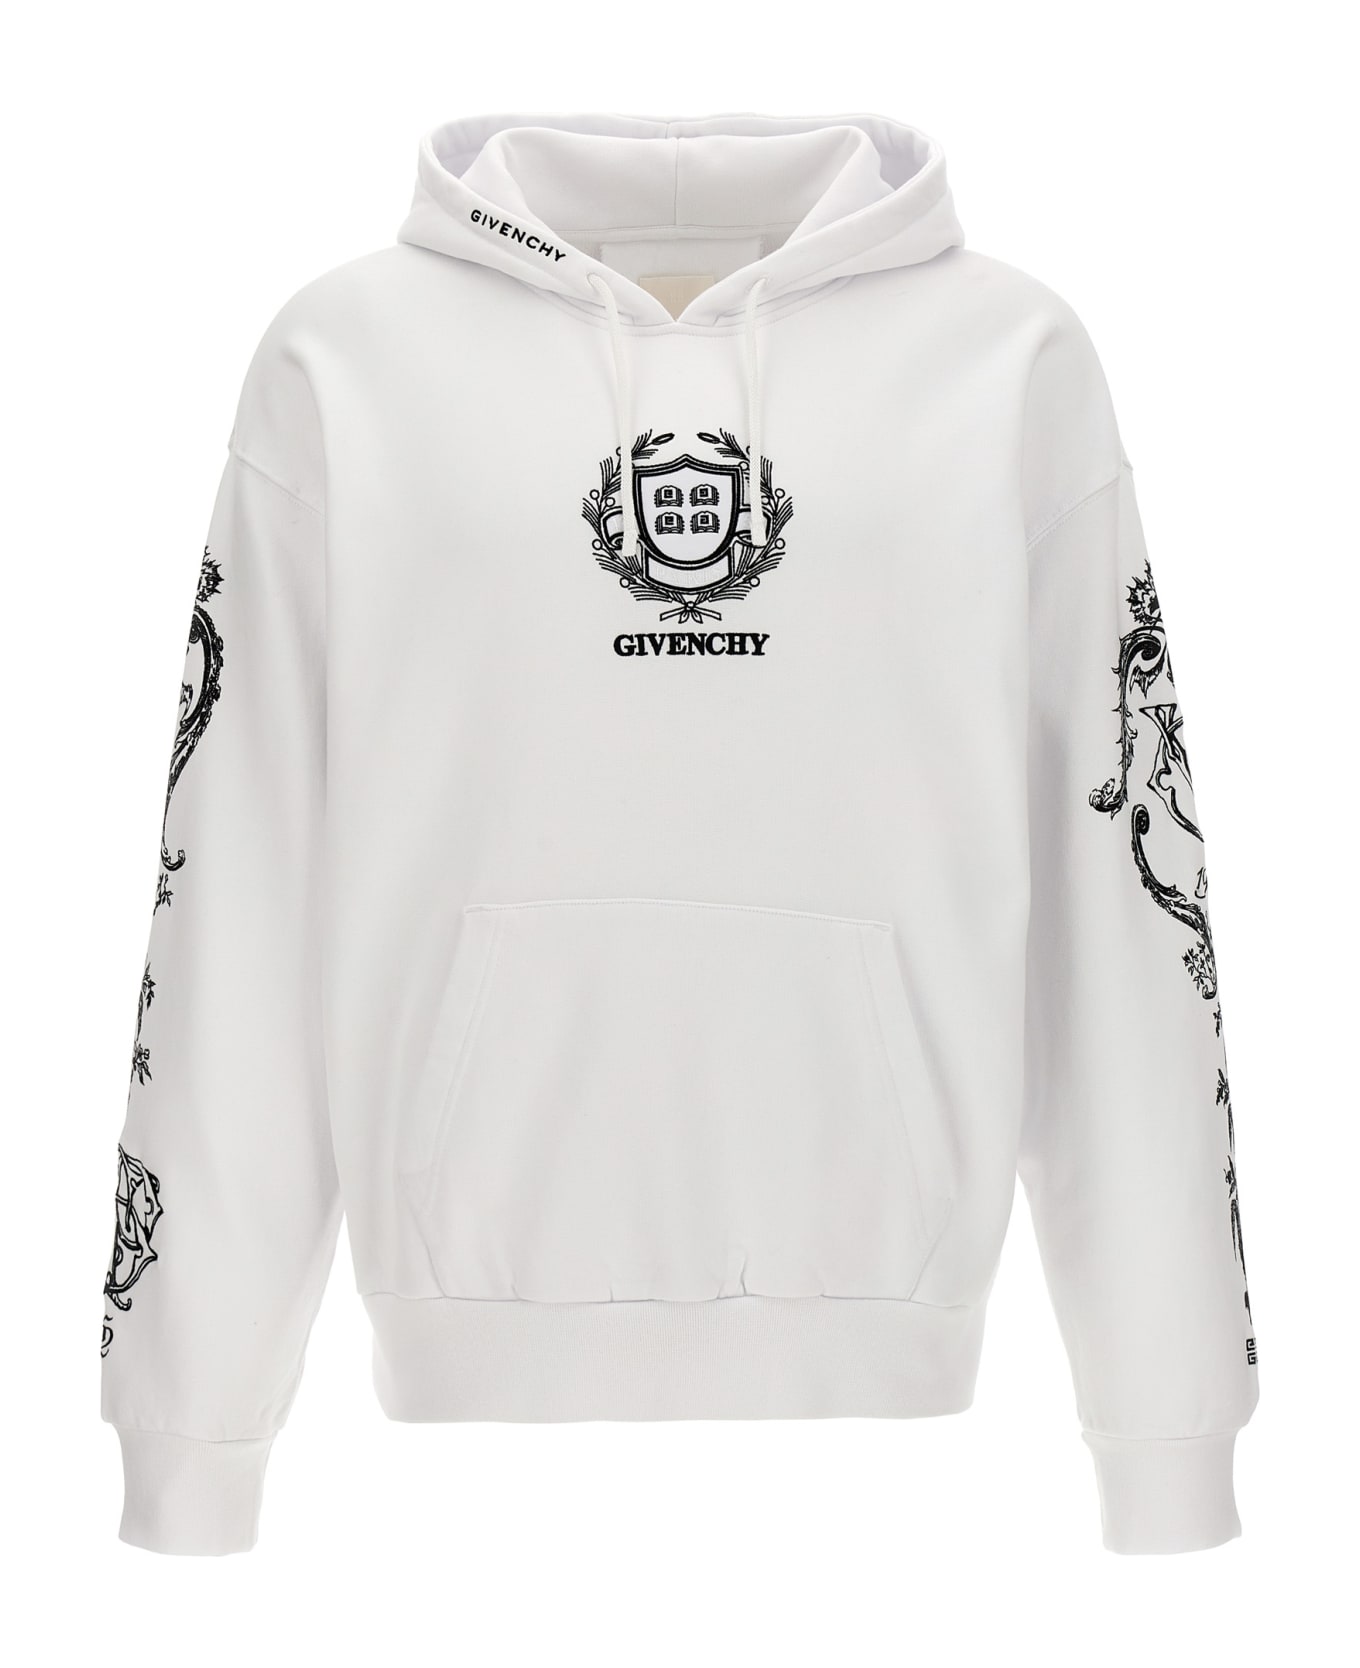 Givenchy Embroidery And Print Hoodie - White/Black